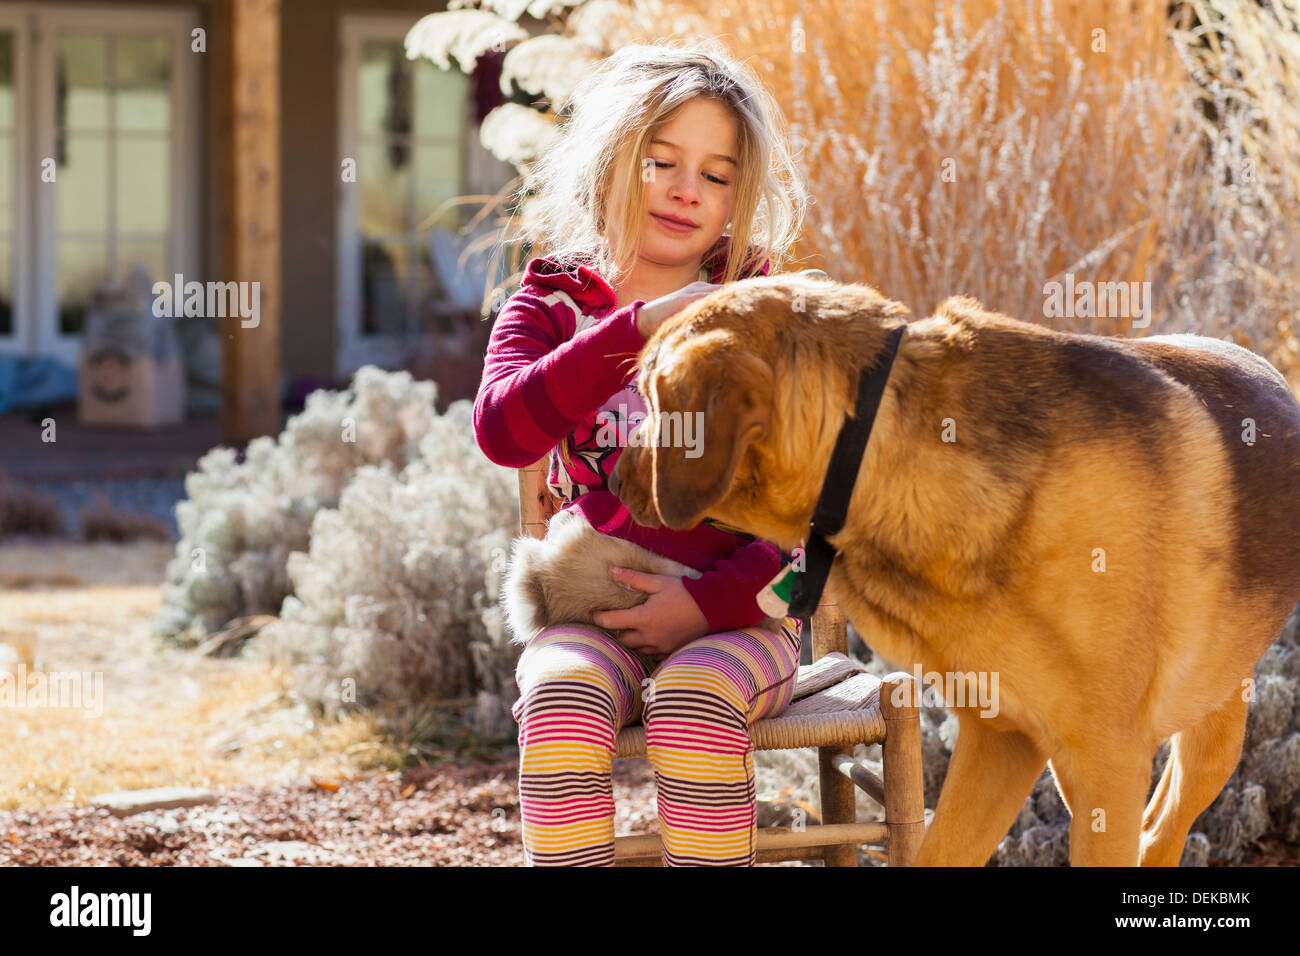 Caucasian girl petting dog outdoors Banque D'Images